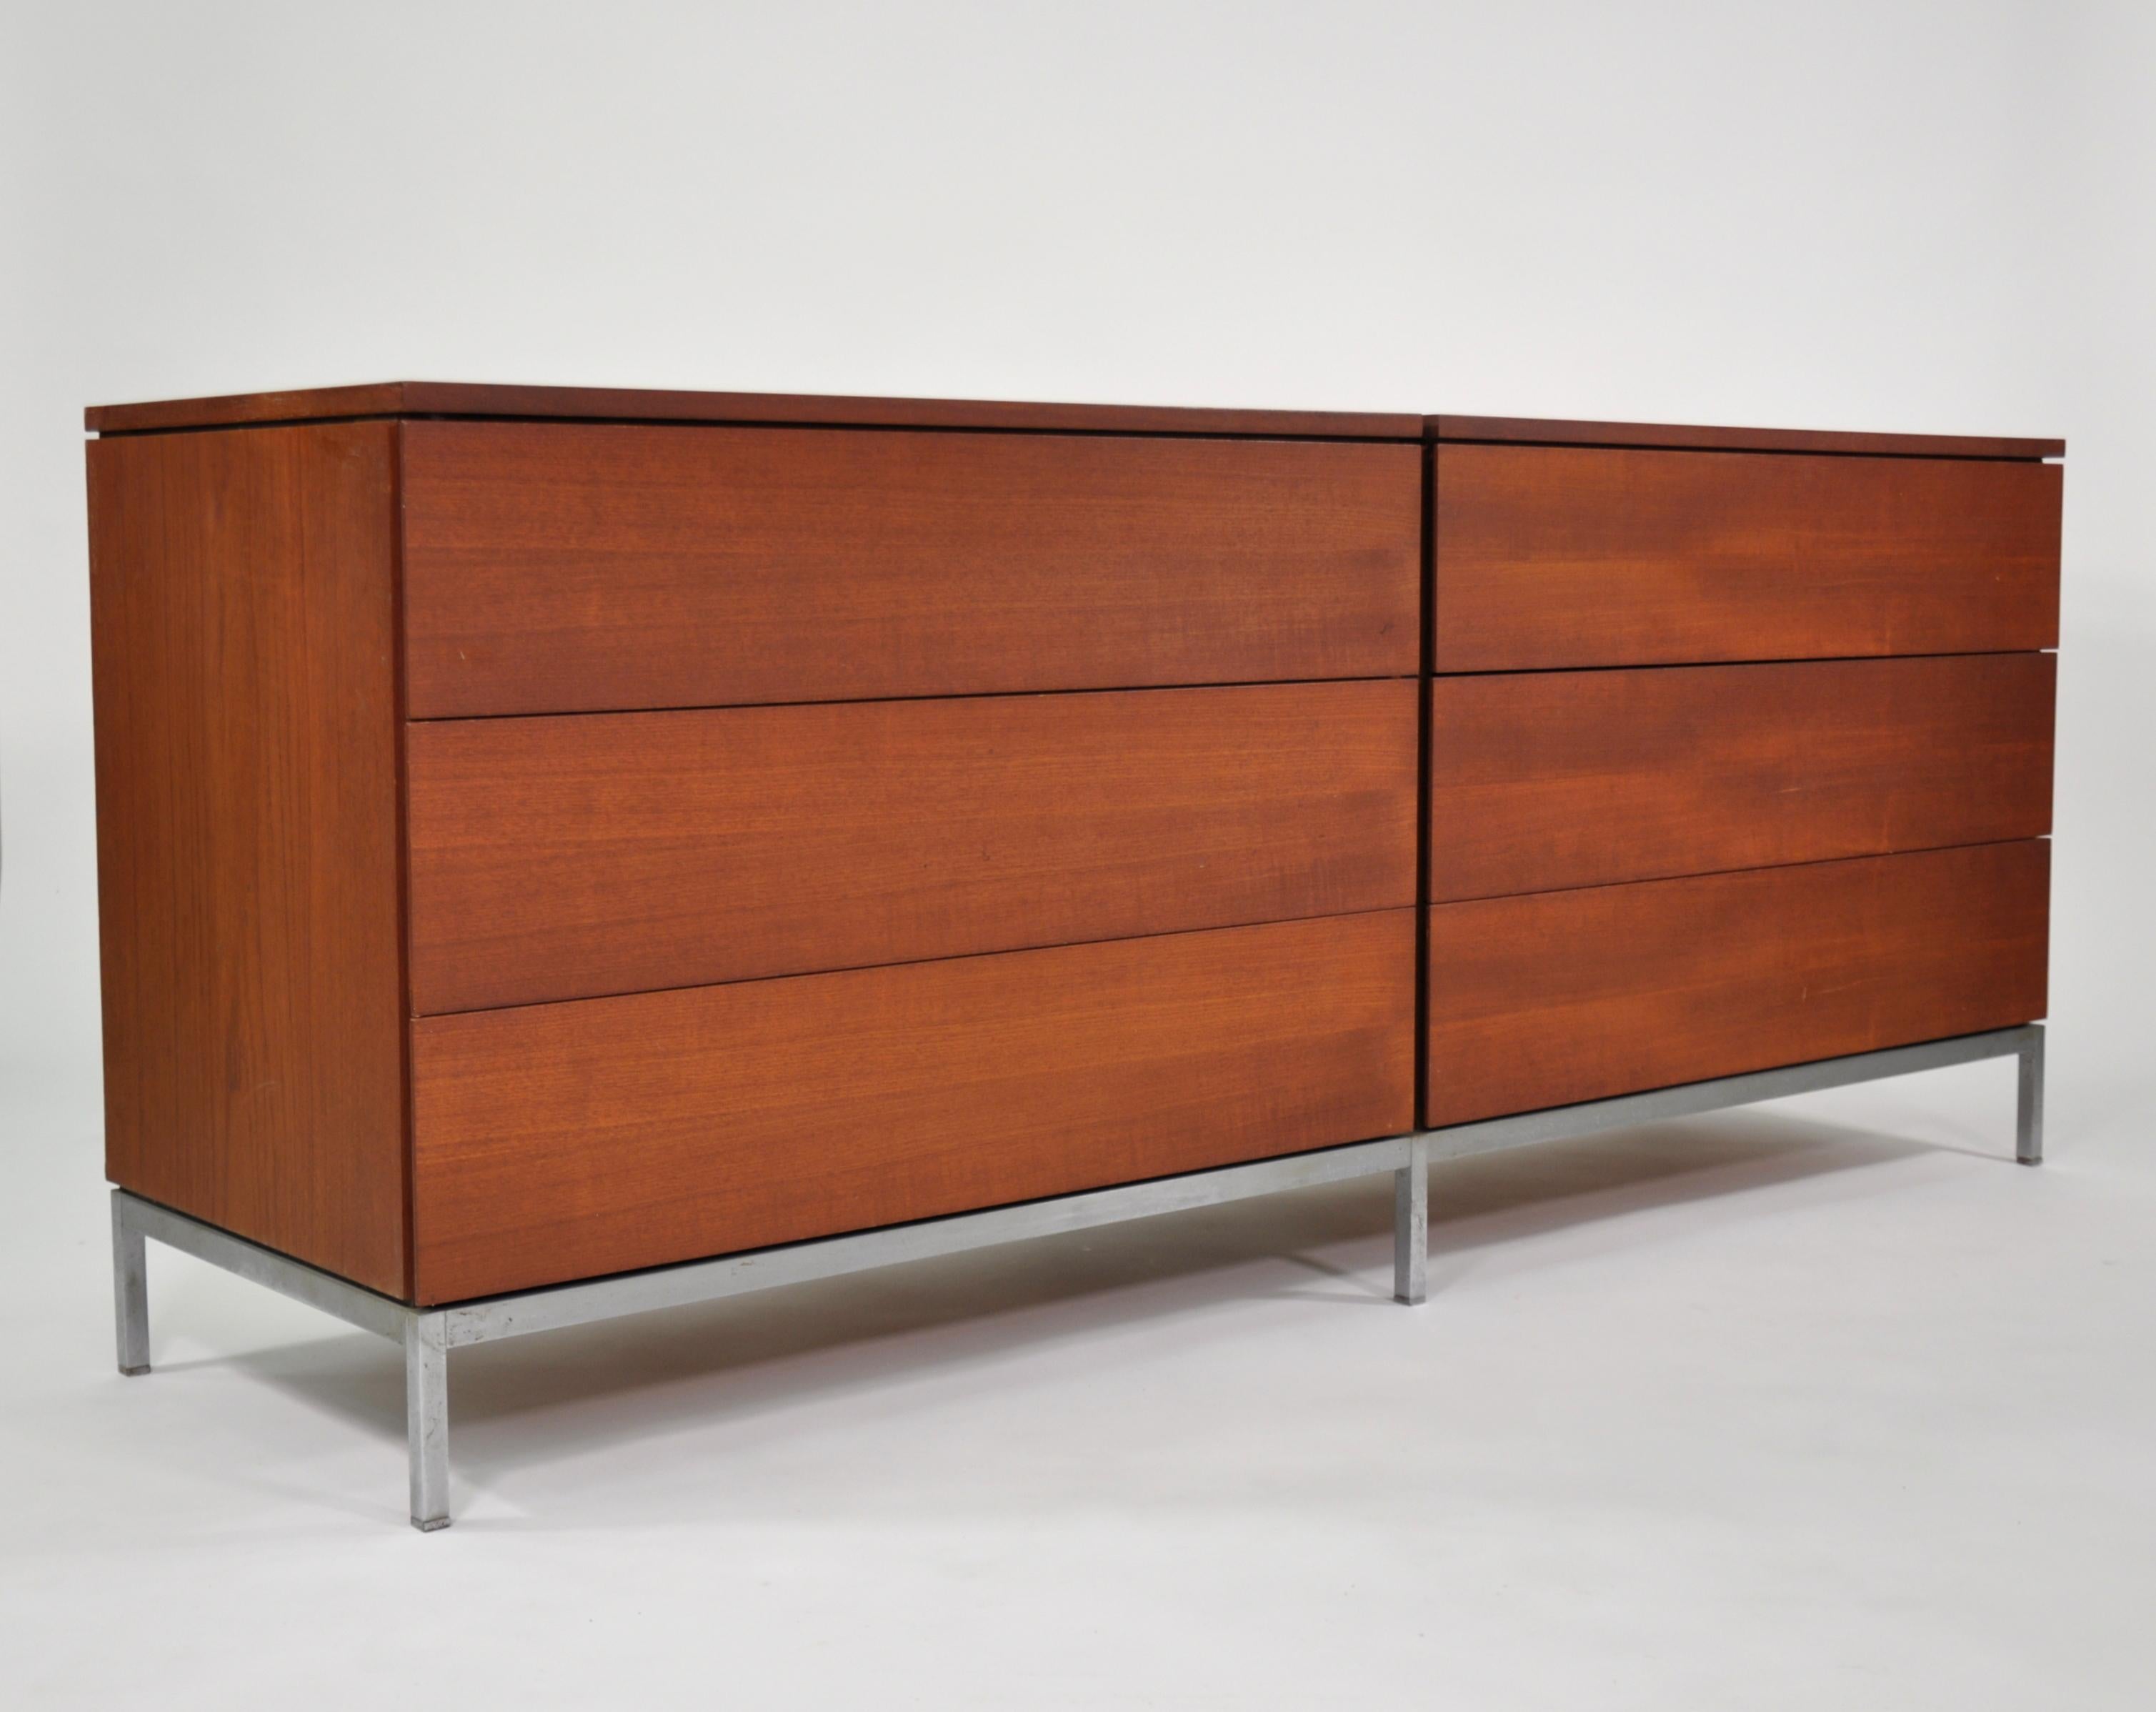 A Minimalist Mid-Century Modern walnut and chrome double dresser designed by Florence Knoll for Knoll Associates, dating from the mid 1950s. The vintage chest features six large maple drawers, four with dividers; the whole is raised on a chromed